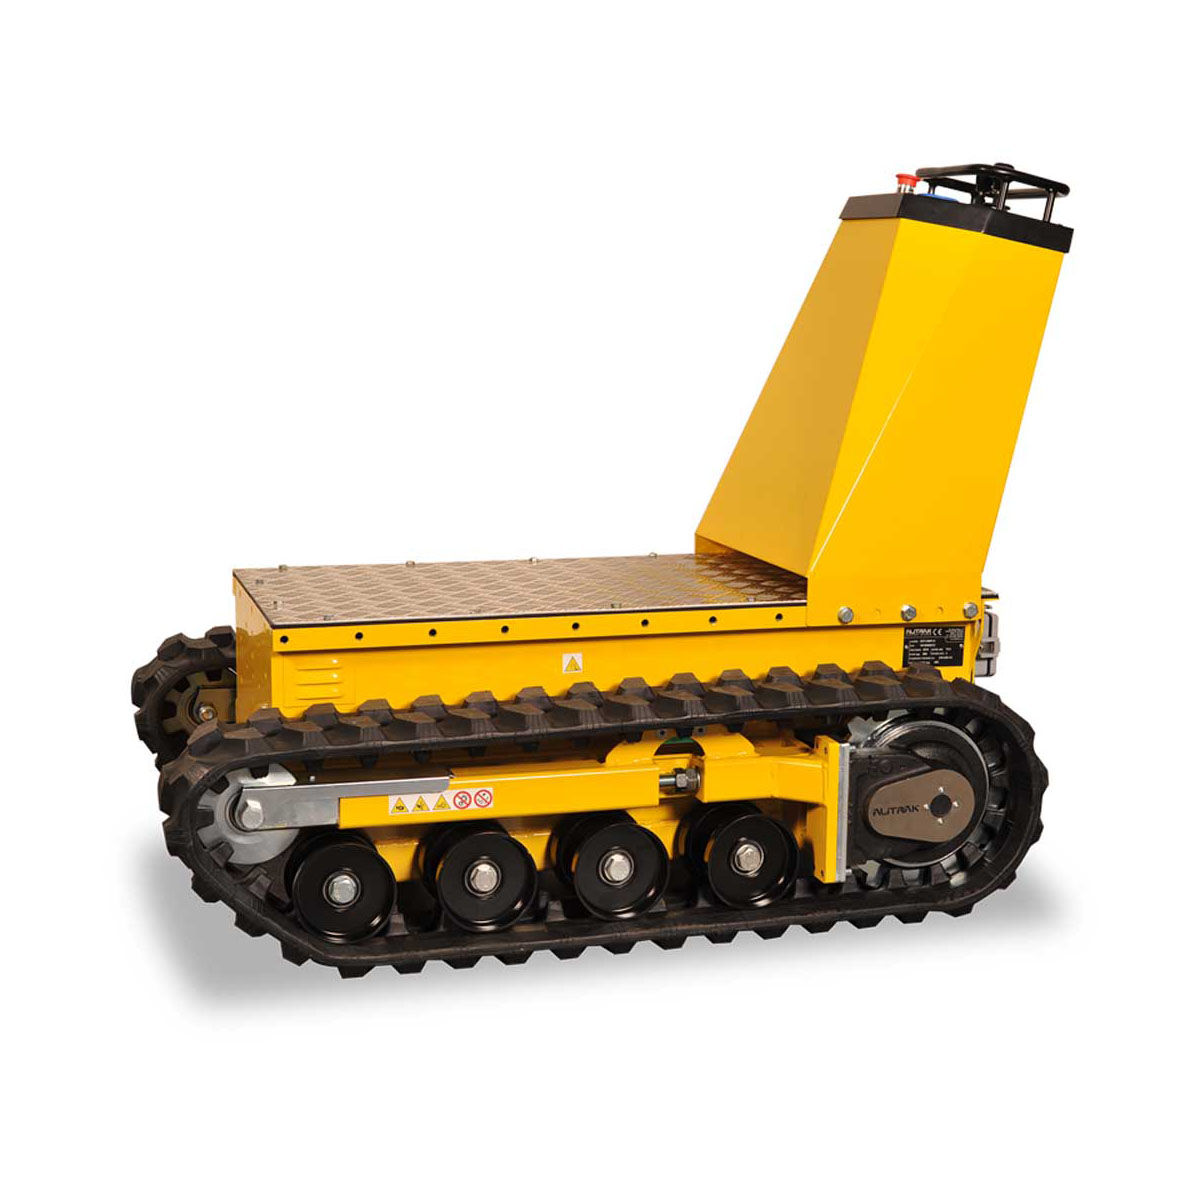 Buy Electric Dumper - Flatbed on Tracks in Electric Dumpers from Alitrak available at Astrolift NZ